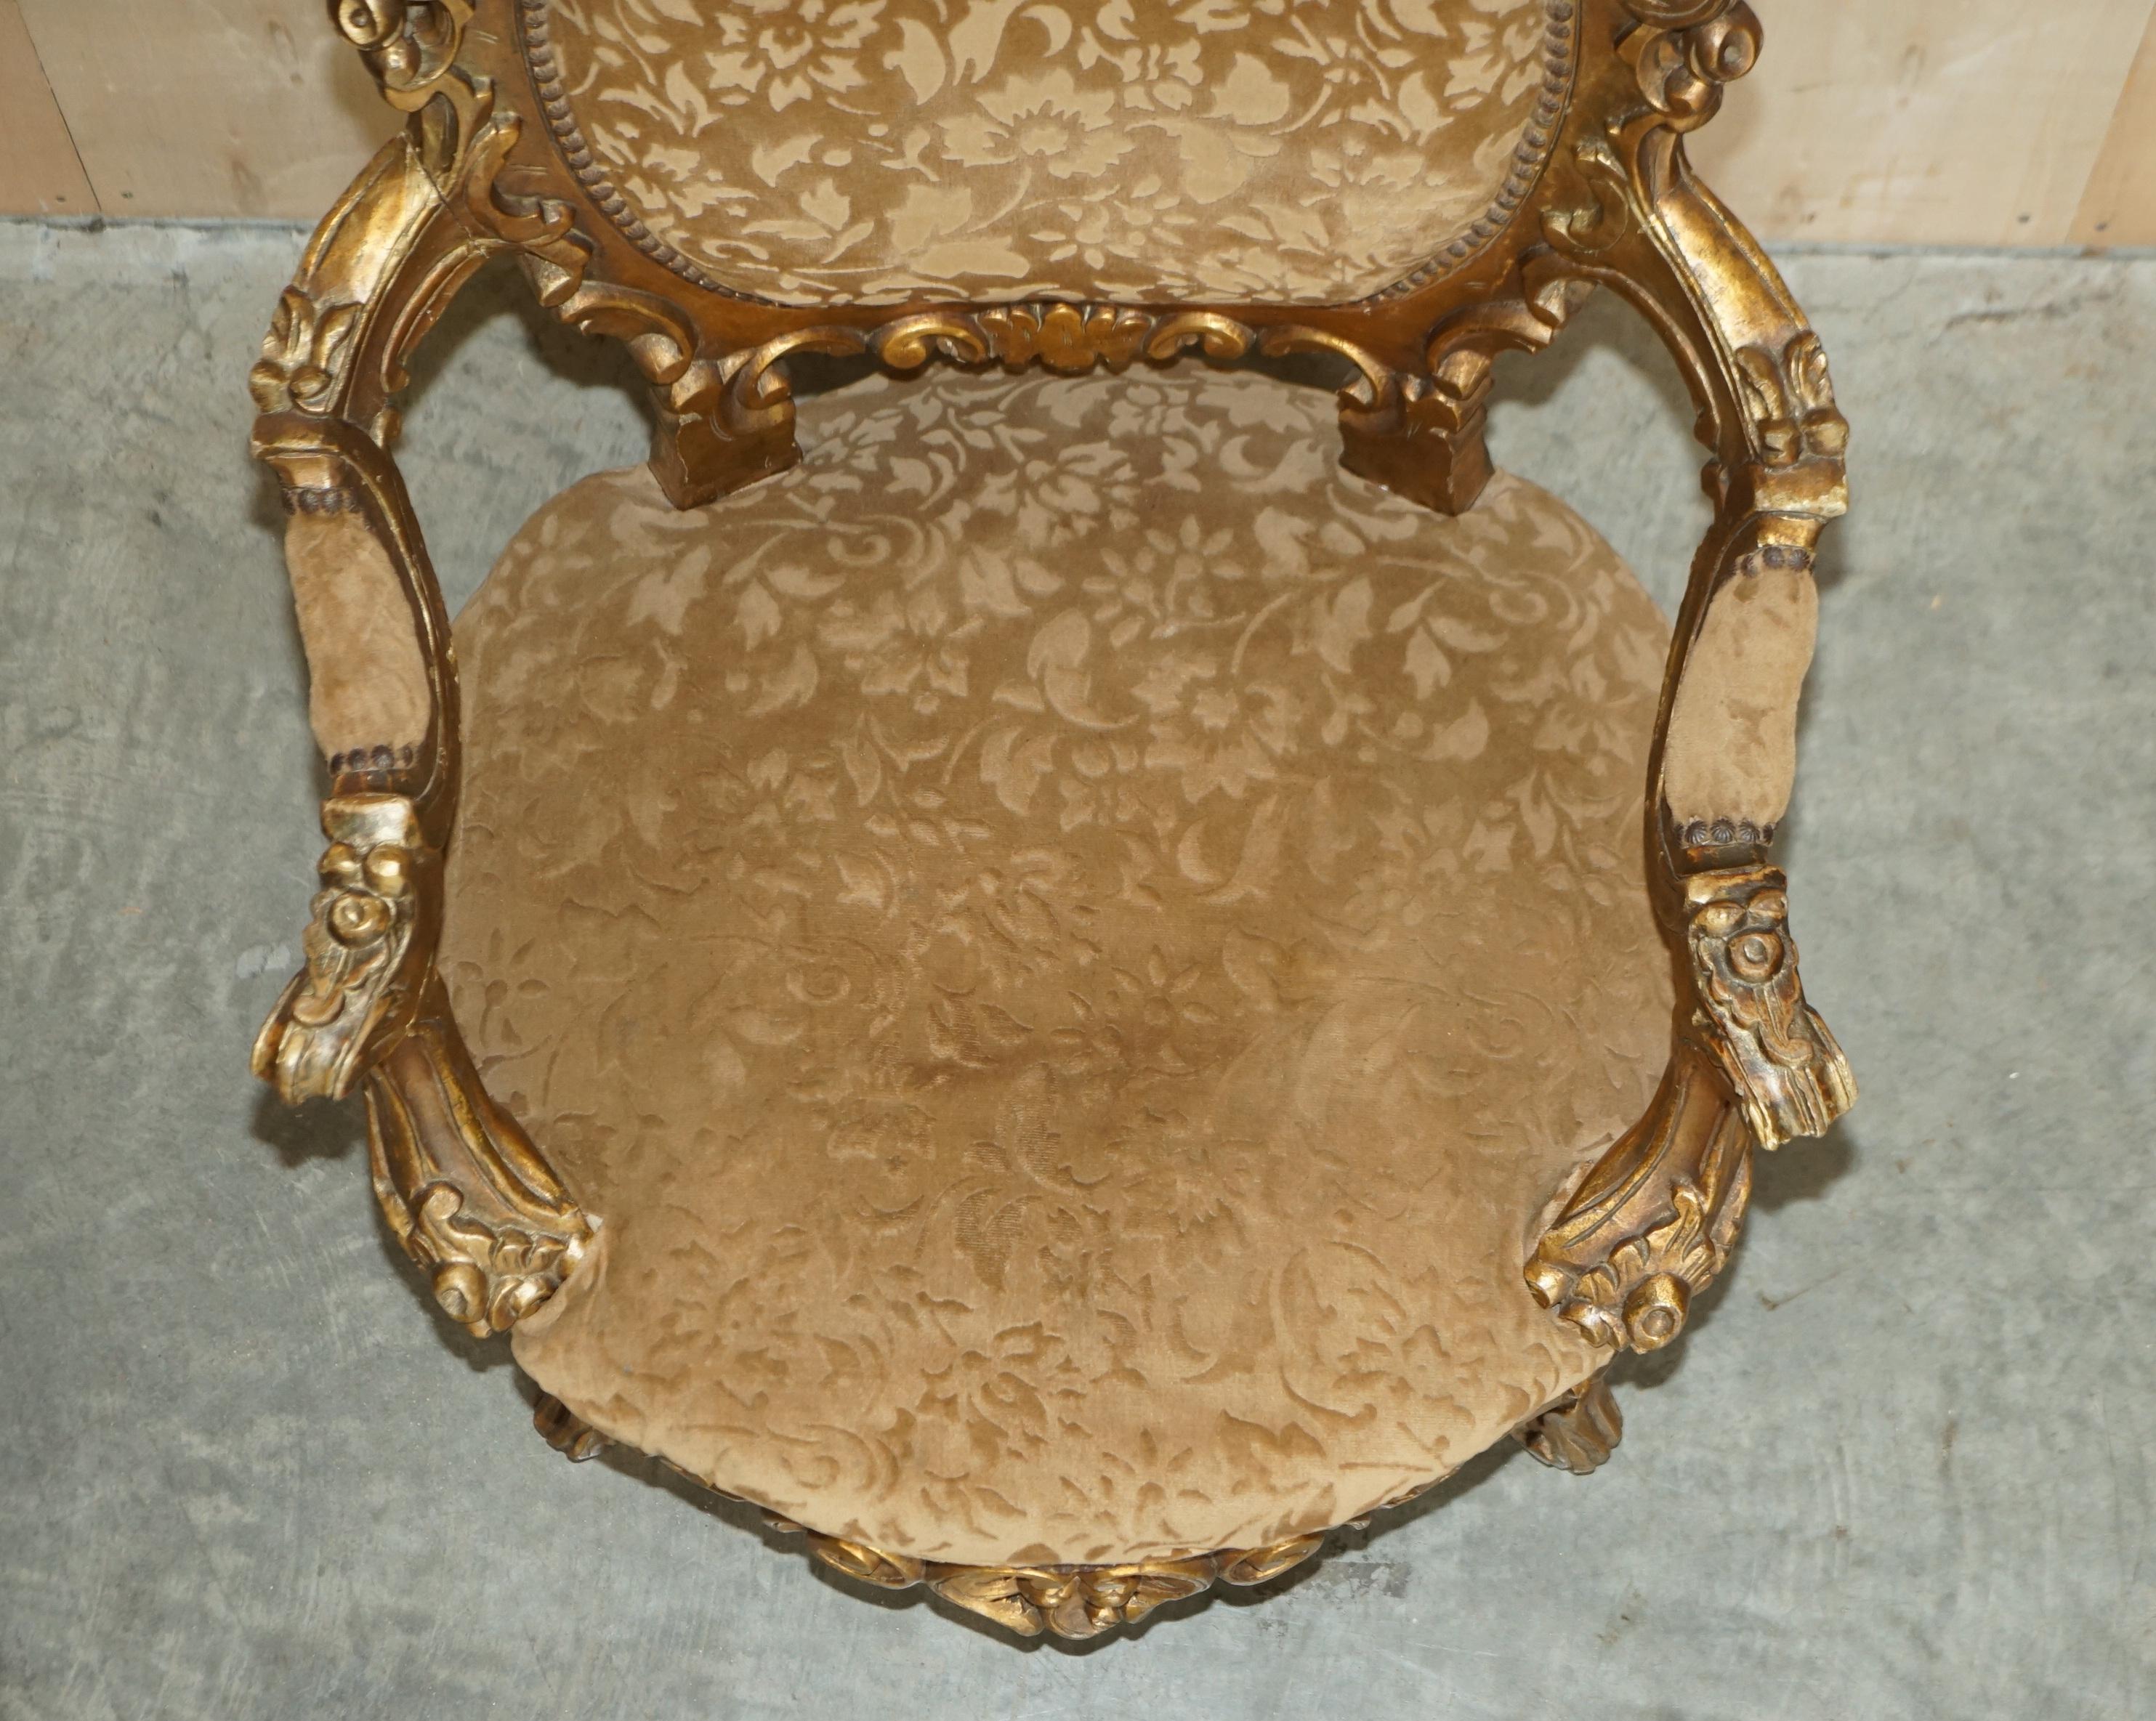 PAIR OF ANTIQUE ORIGINAL GiLTWOOD FINISH FRENCH LOUIS XV FAUTEUILS ARMCHAIRS For Sale 9